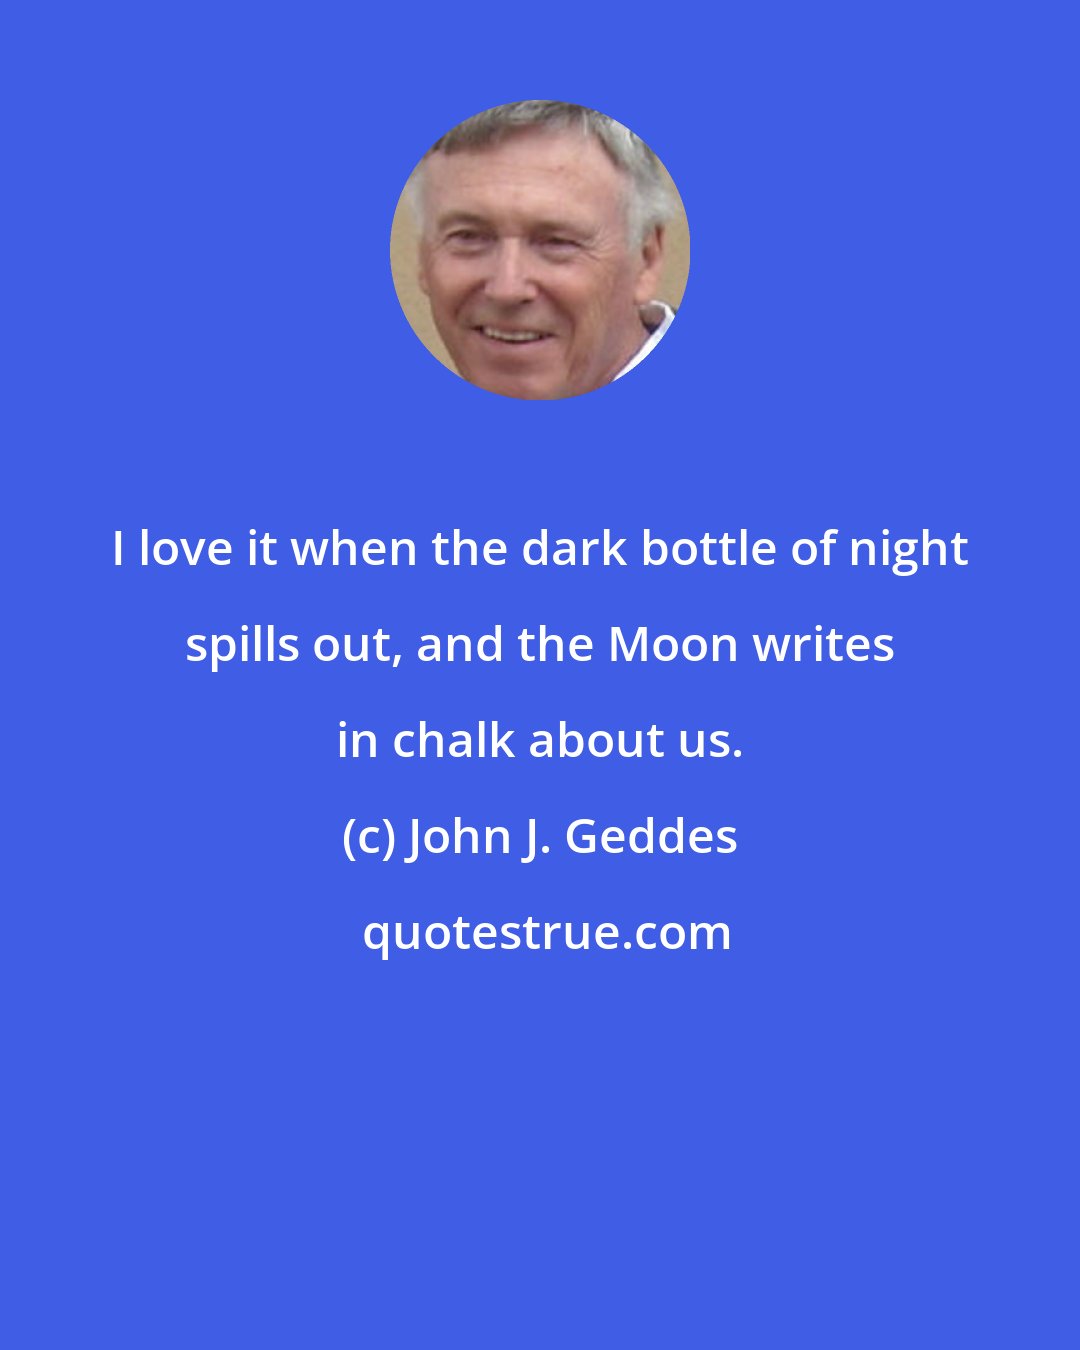 John J. Geddes: I love it when the dark bottle of night spills out, and the Moon writes in chalk about us.